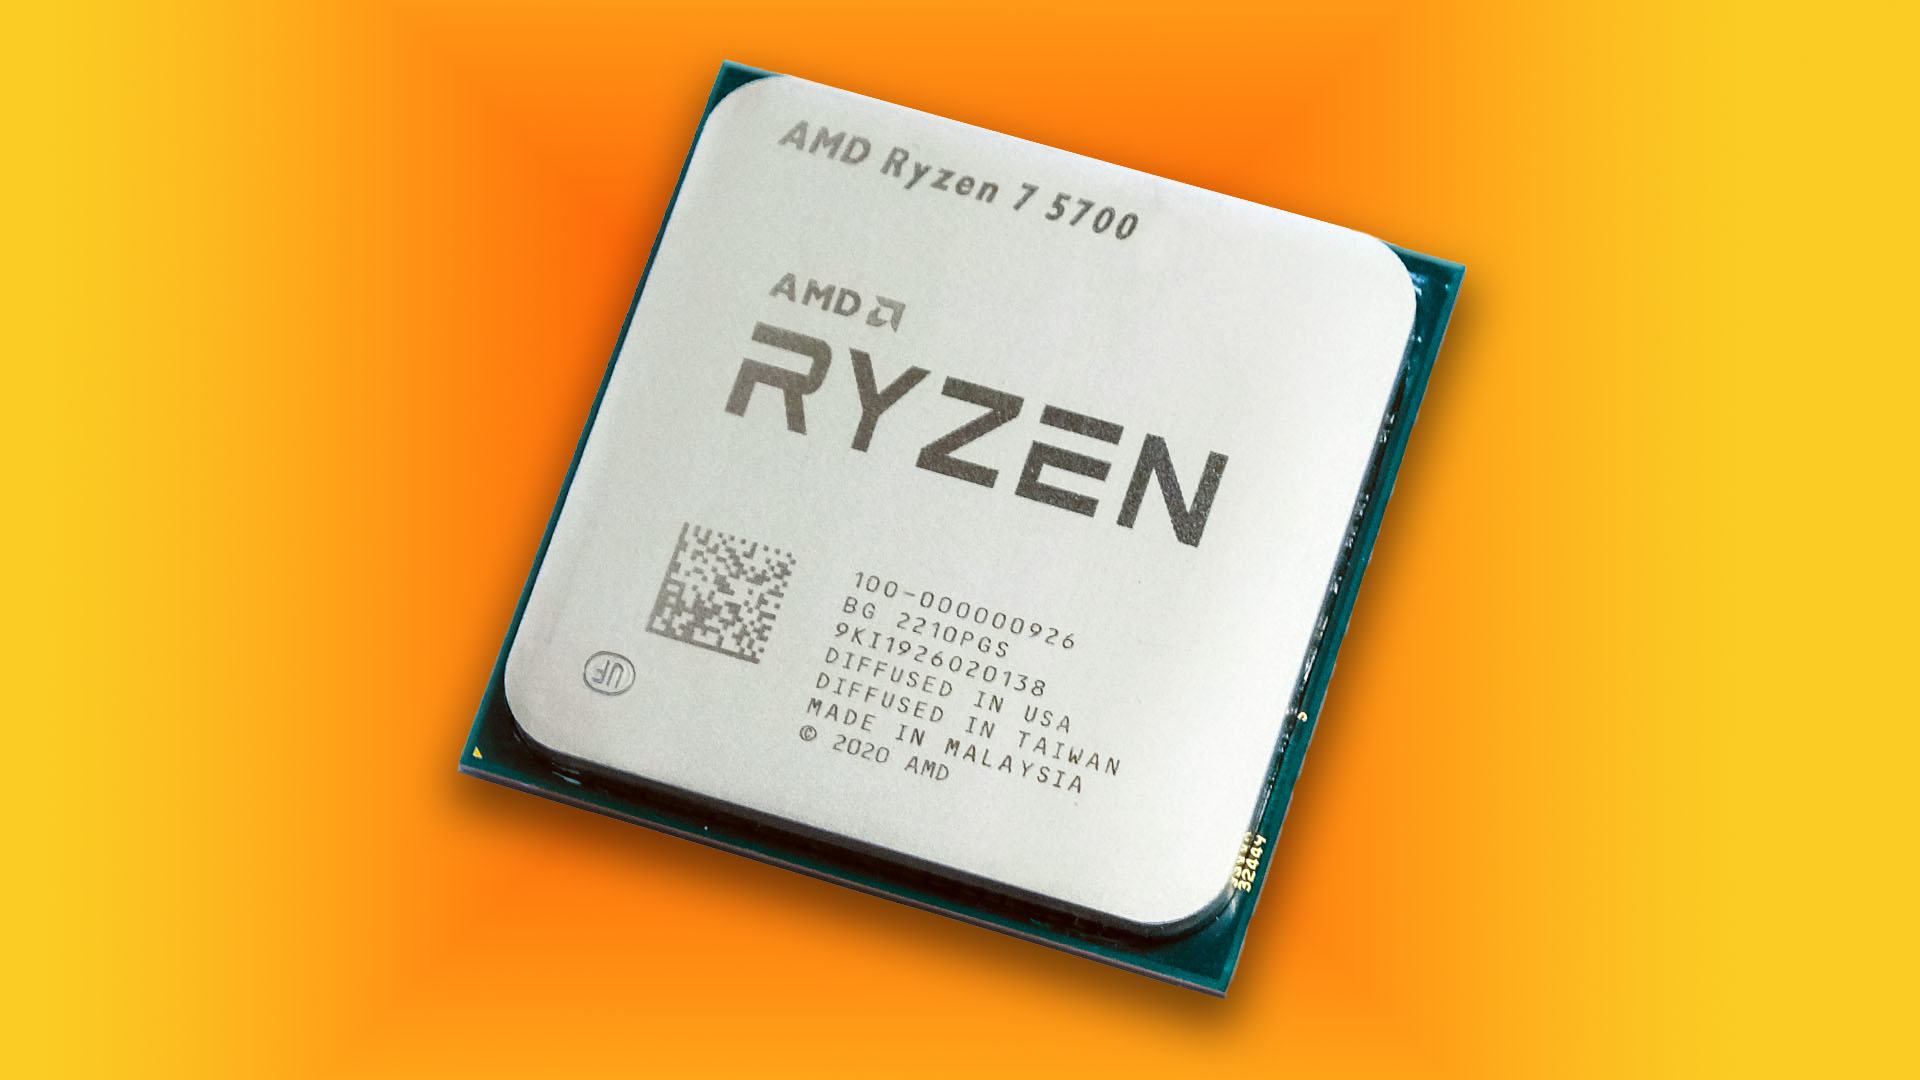 AMD's new 8-core CPU is bad news for gamers